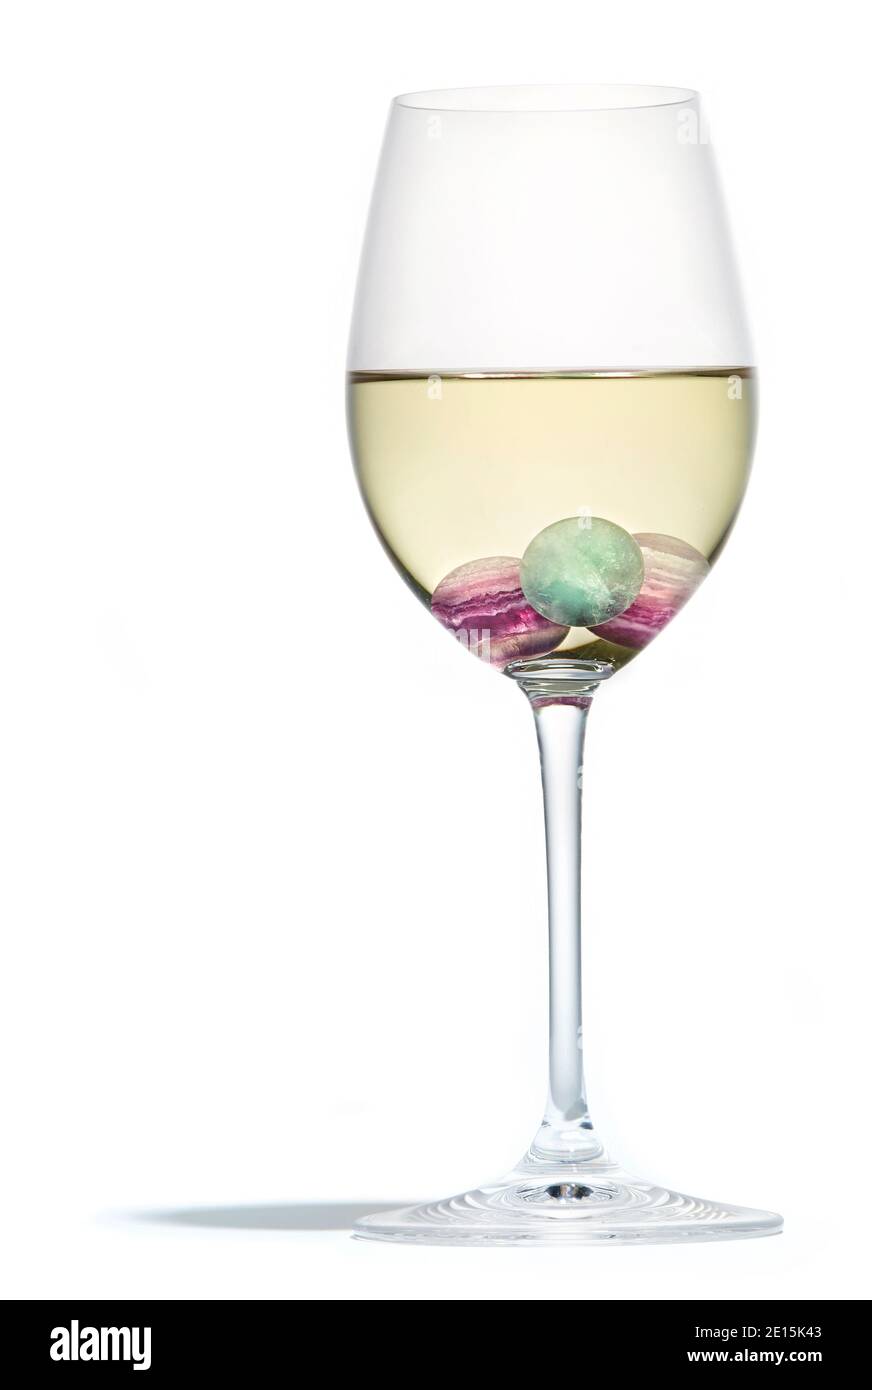 Wine spheres designed by Anna Rabinowicz for RabLabs and Kim Crawford Wines photographed on a white background Stock Photo